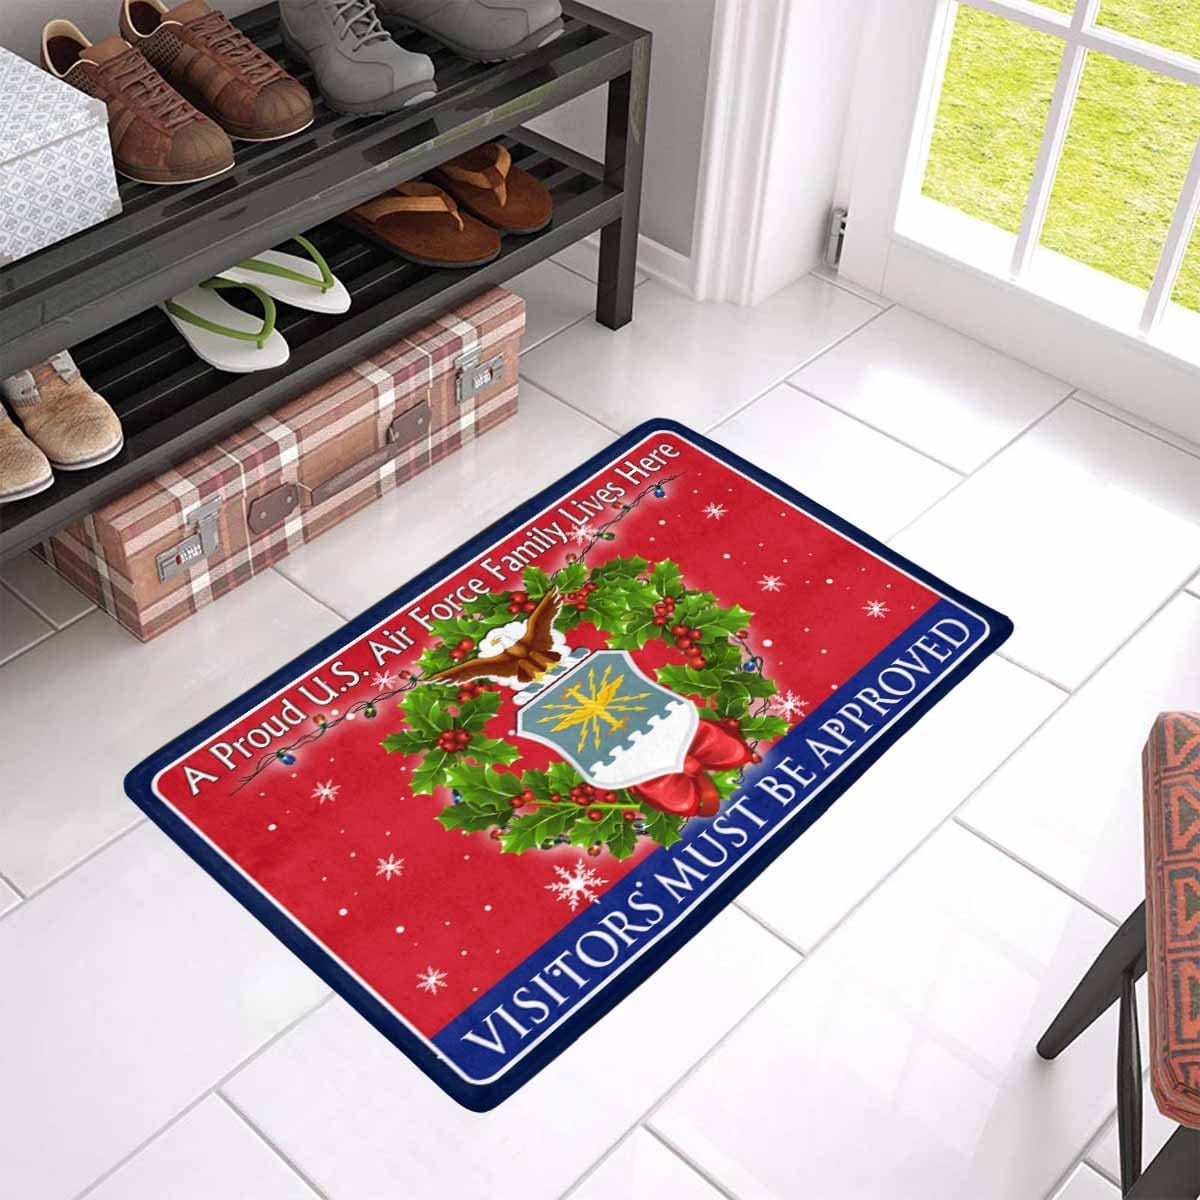 A Proud US Air Force Family Lives Here -Visitor must be approved -Christmas Doormat-Doormat-USAF-Ranks-Veterans Nation